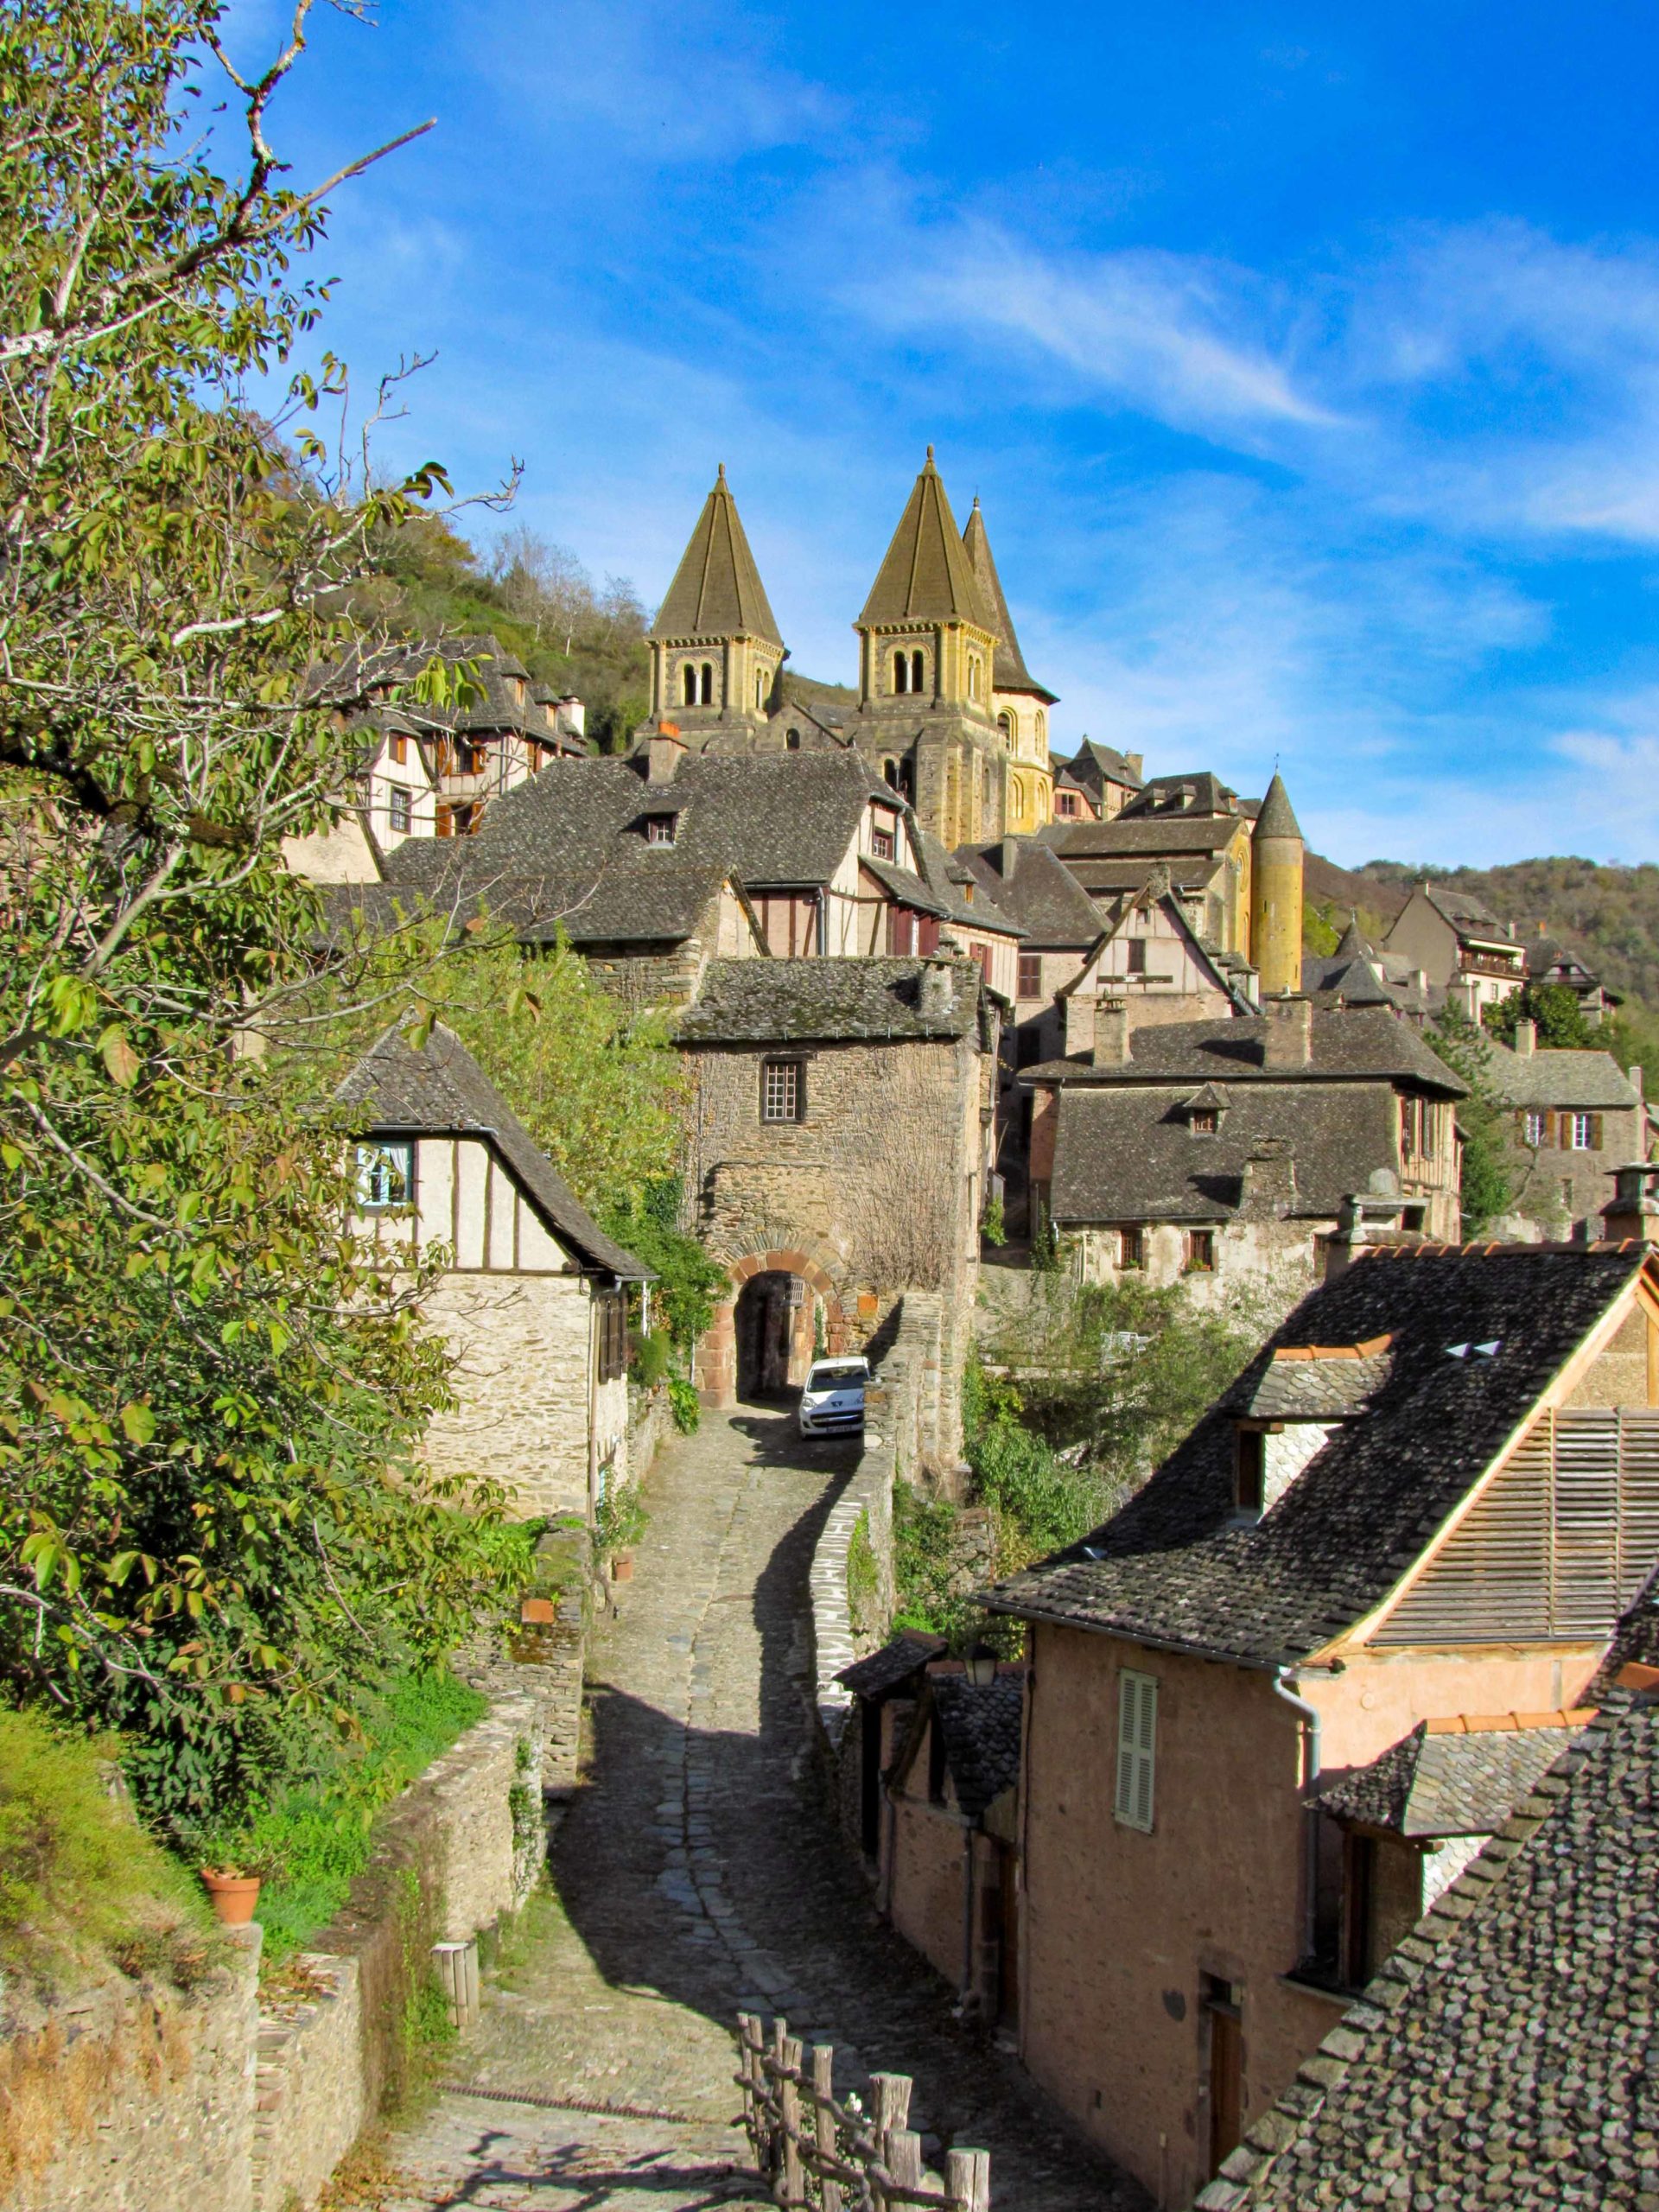 Villages in France - Conques © Daniel CULSAN - licence [CC BY-SA 3.0] from Wikimedia Commons